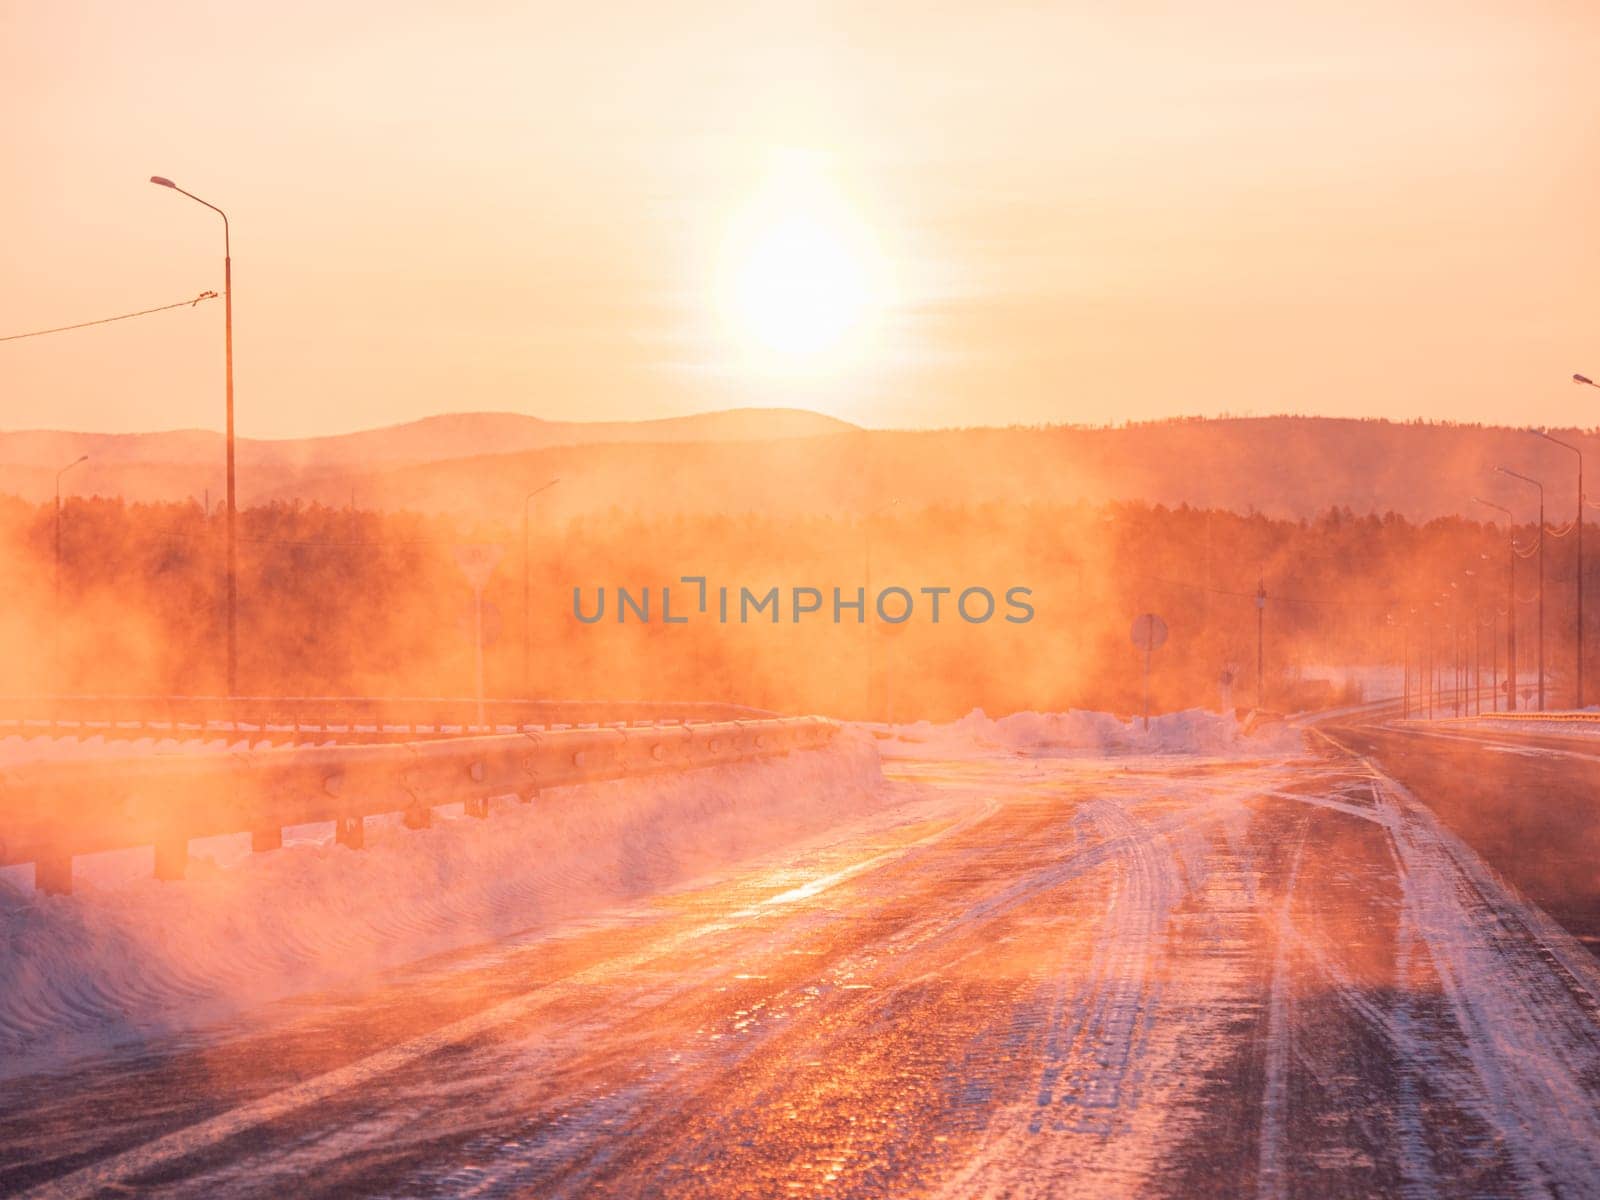 The sun rises beautifully over a snow-covered road in a serene winter countryside.